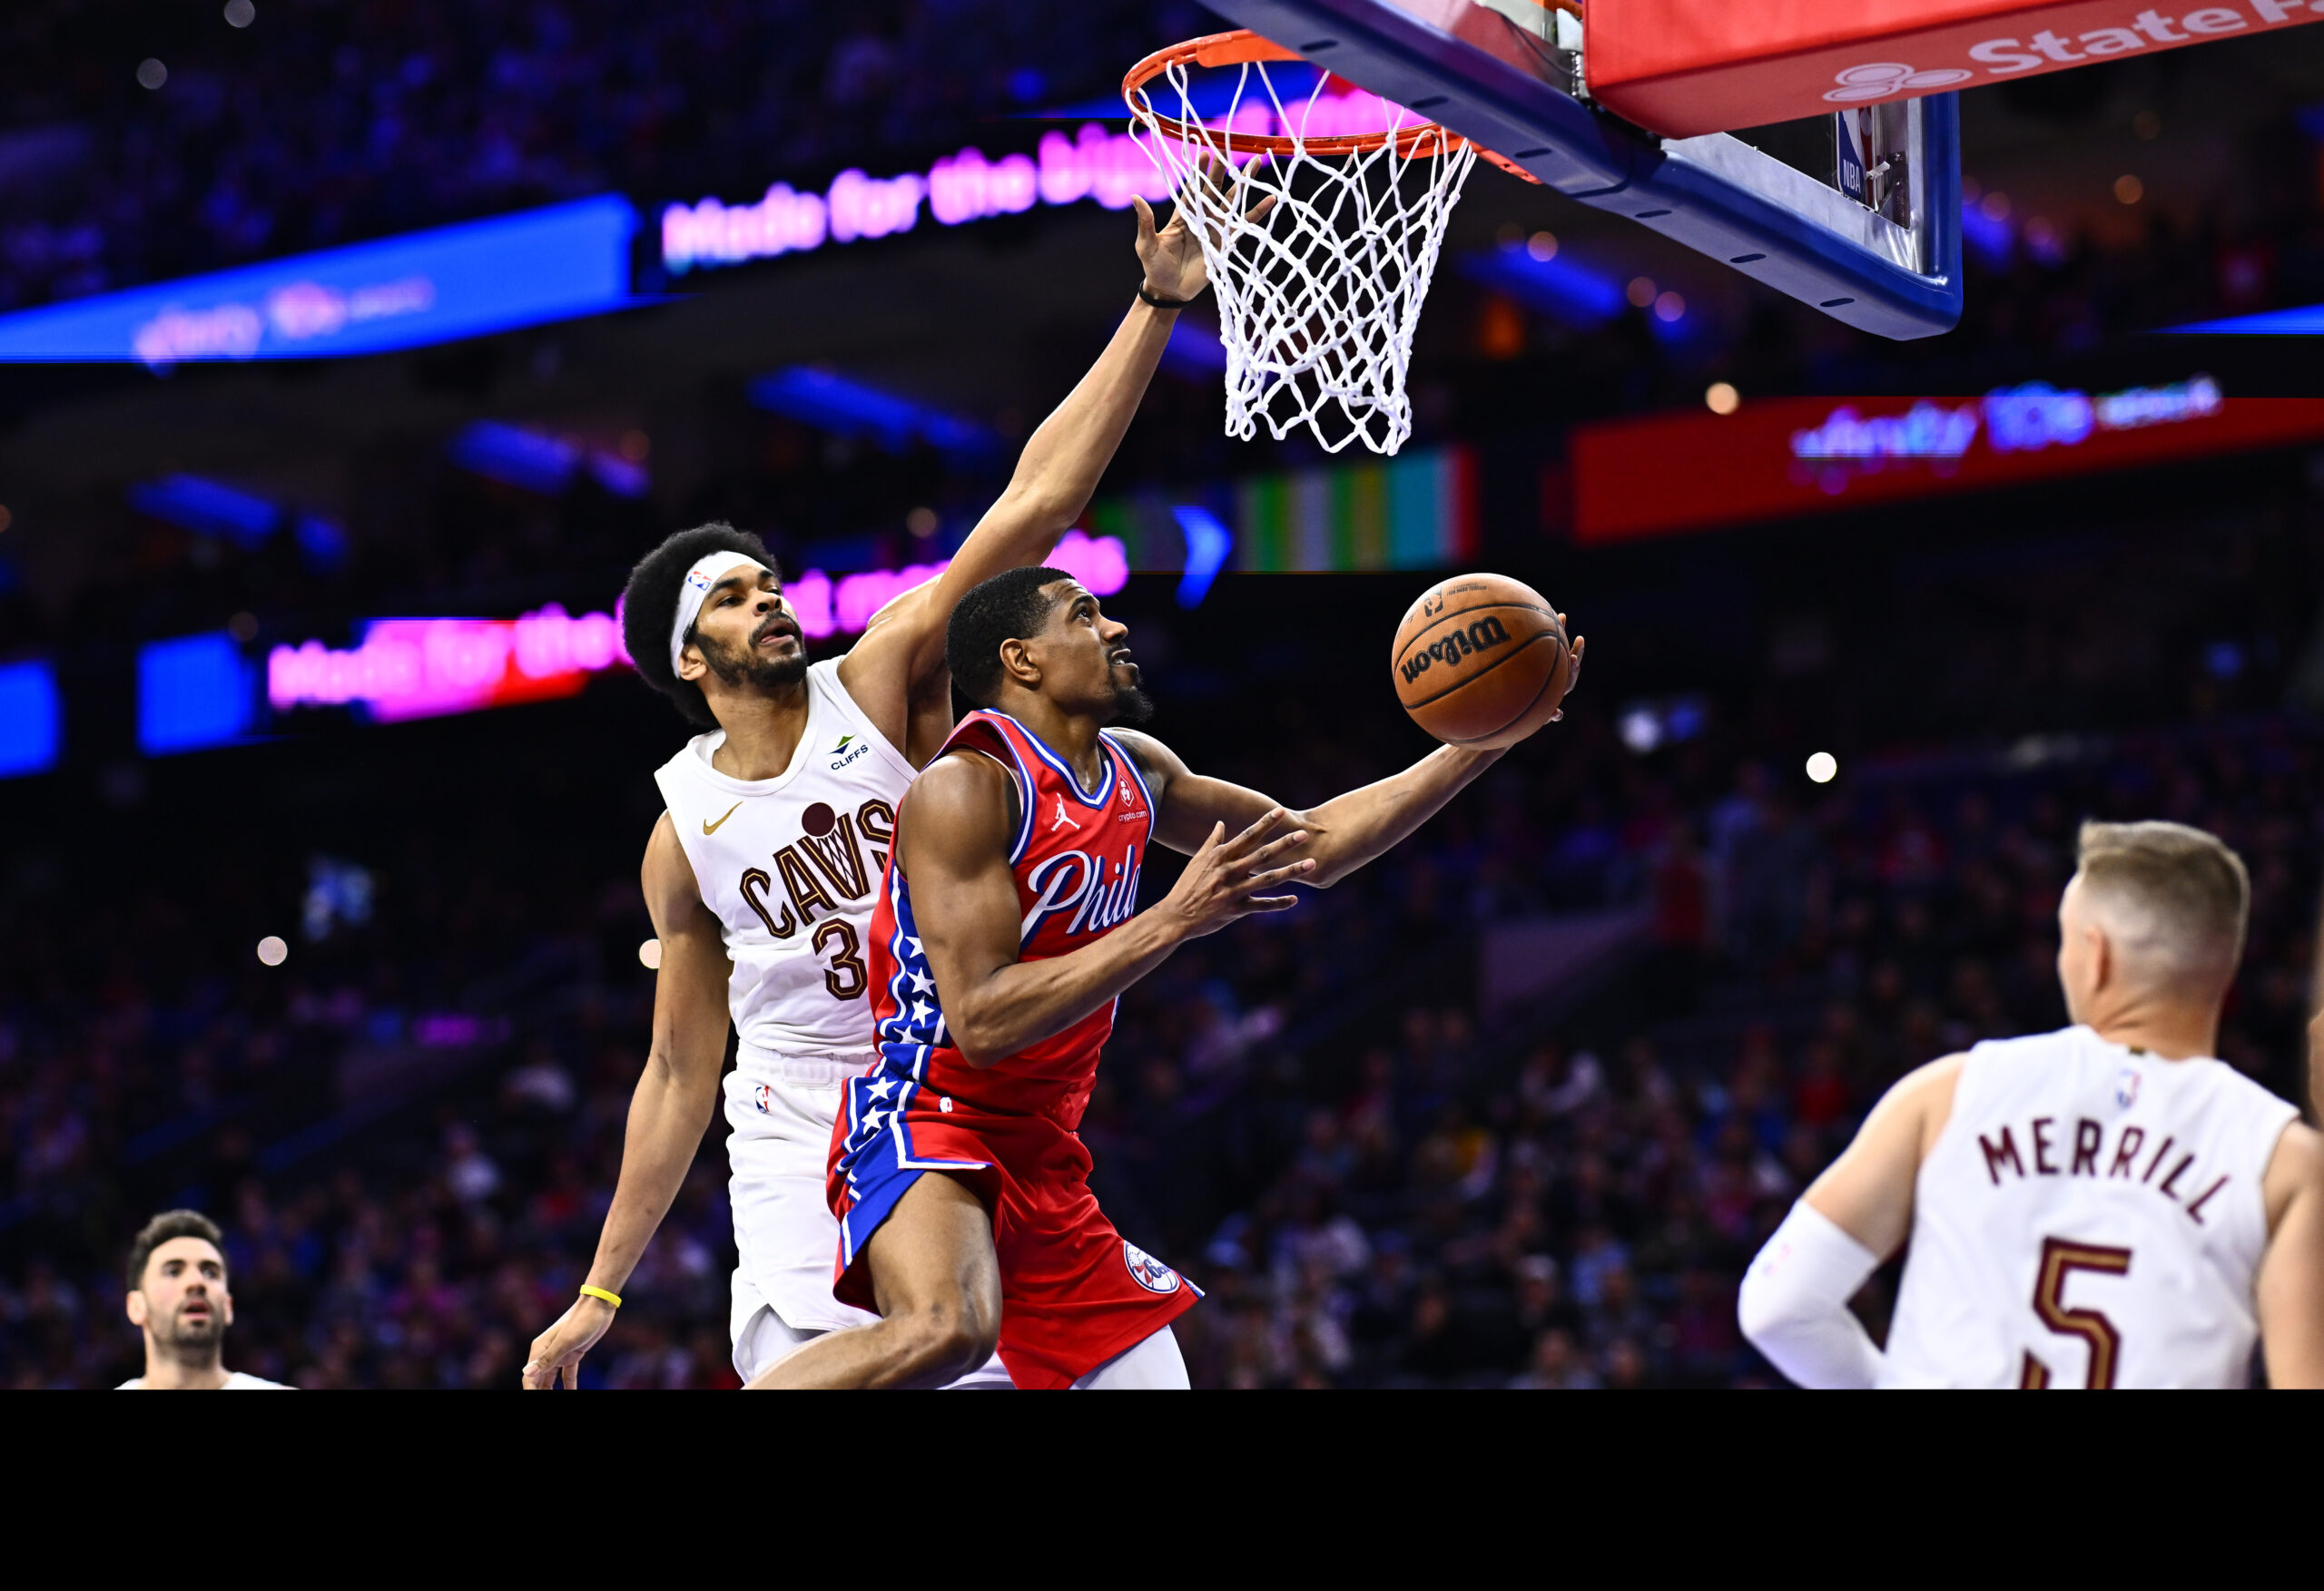 De’Anthony Melton discusses back issue after return in Sixers win